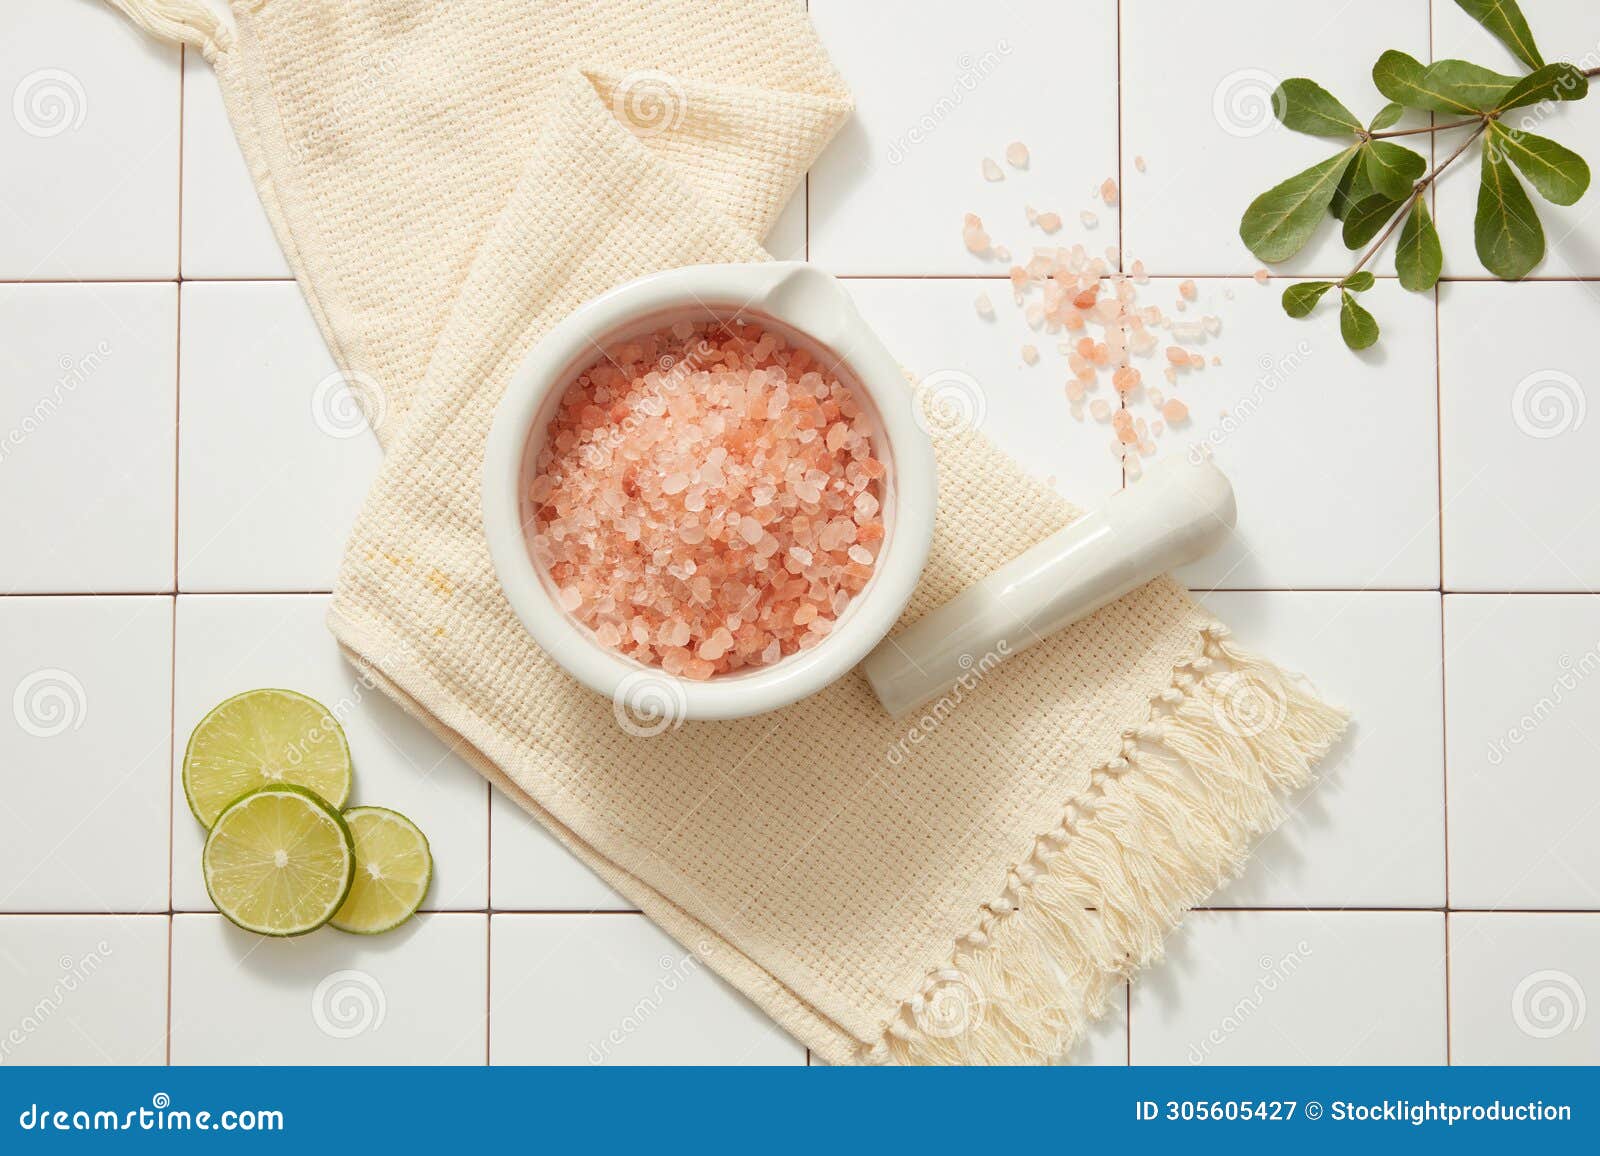 himalayan pink salt reduces sebum production and clears skin congestion